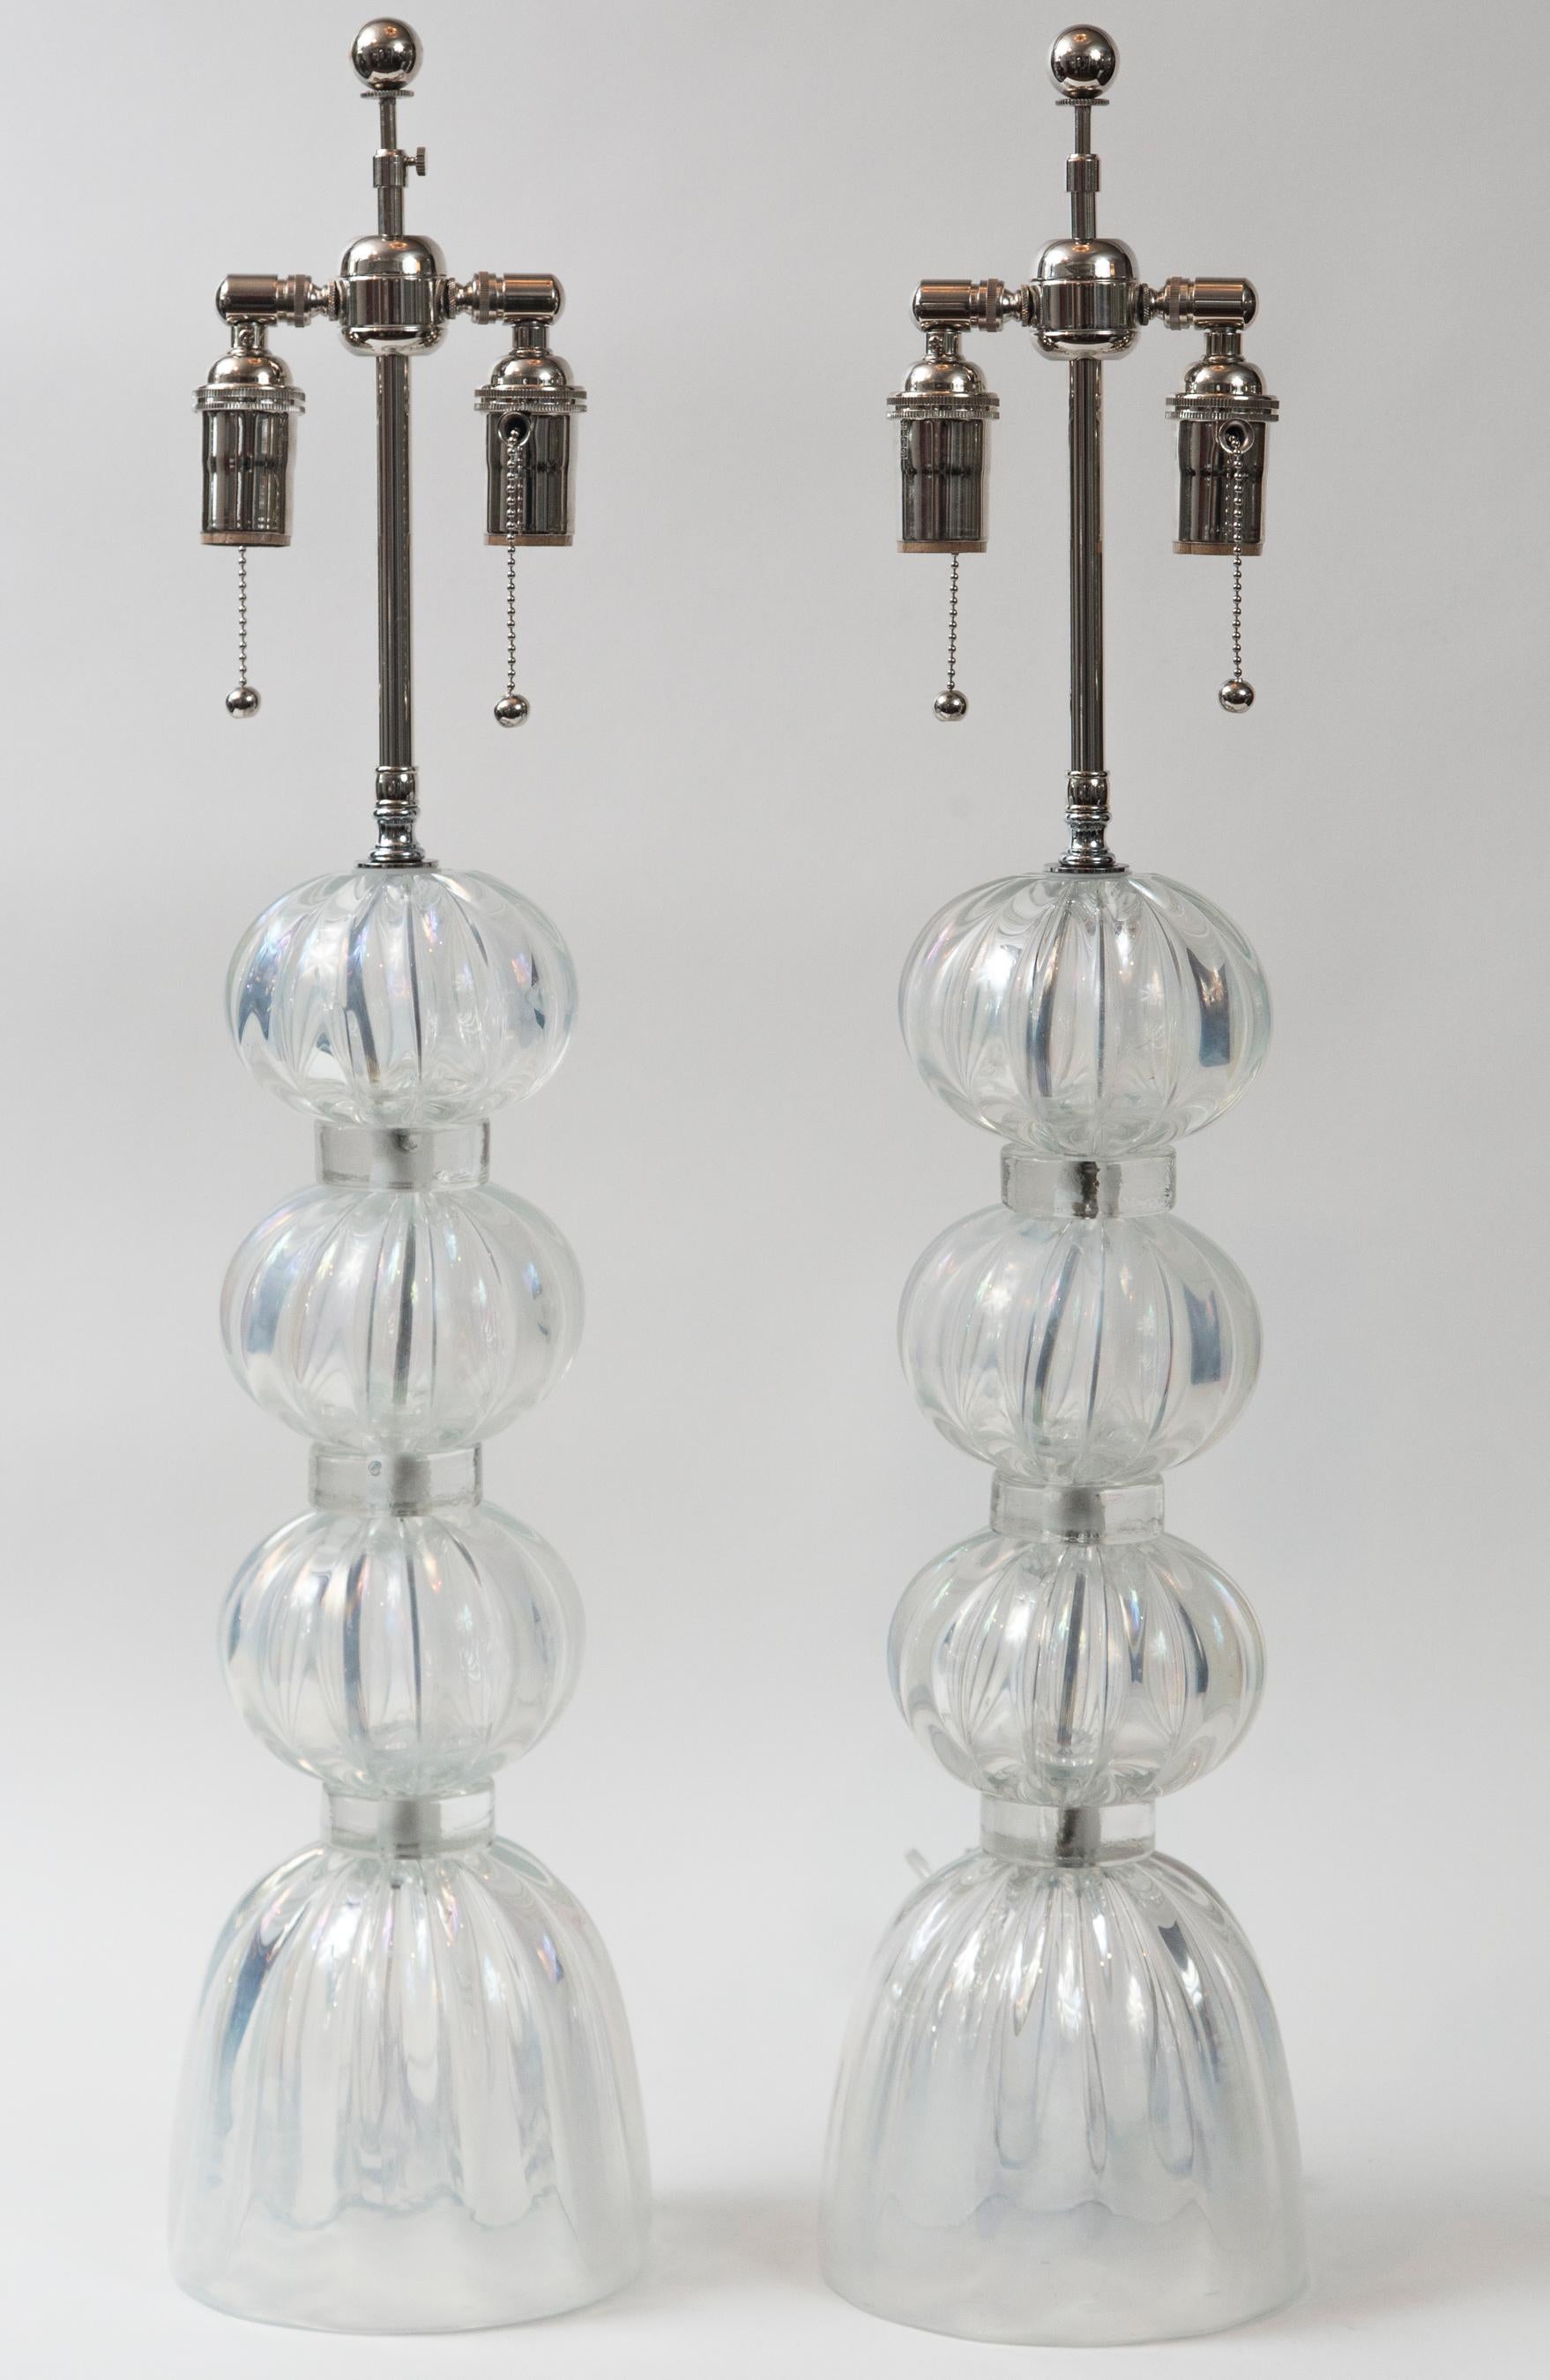 Beautiful pair of artisan blown iridescent clear ball lamps
 Electrified to code with UL approved parts, hardware in  polished brass with pull chains for 2 medium base bulbs per lamp and an on/off cord switch, lamping height adjustable.
Dating: new,